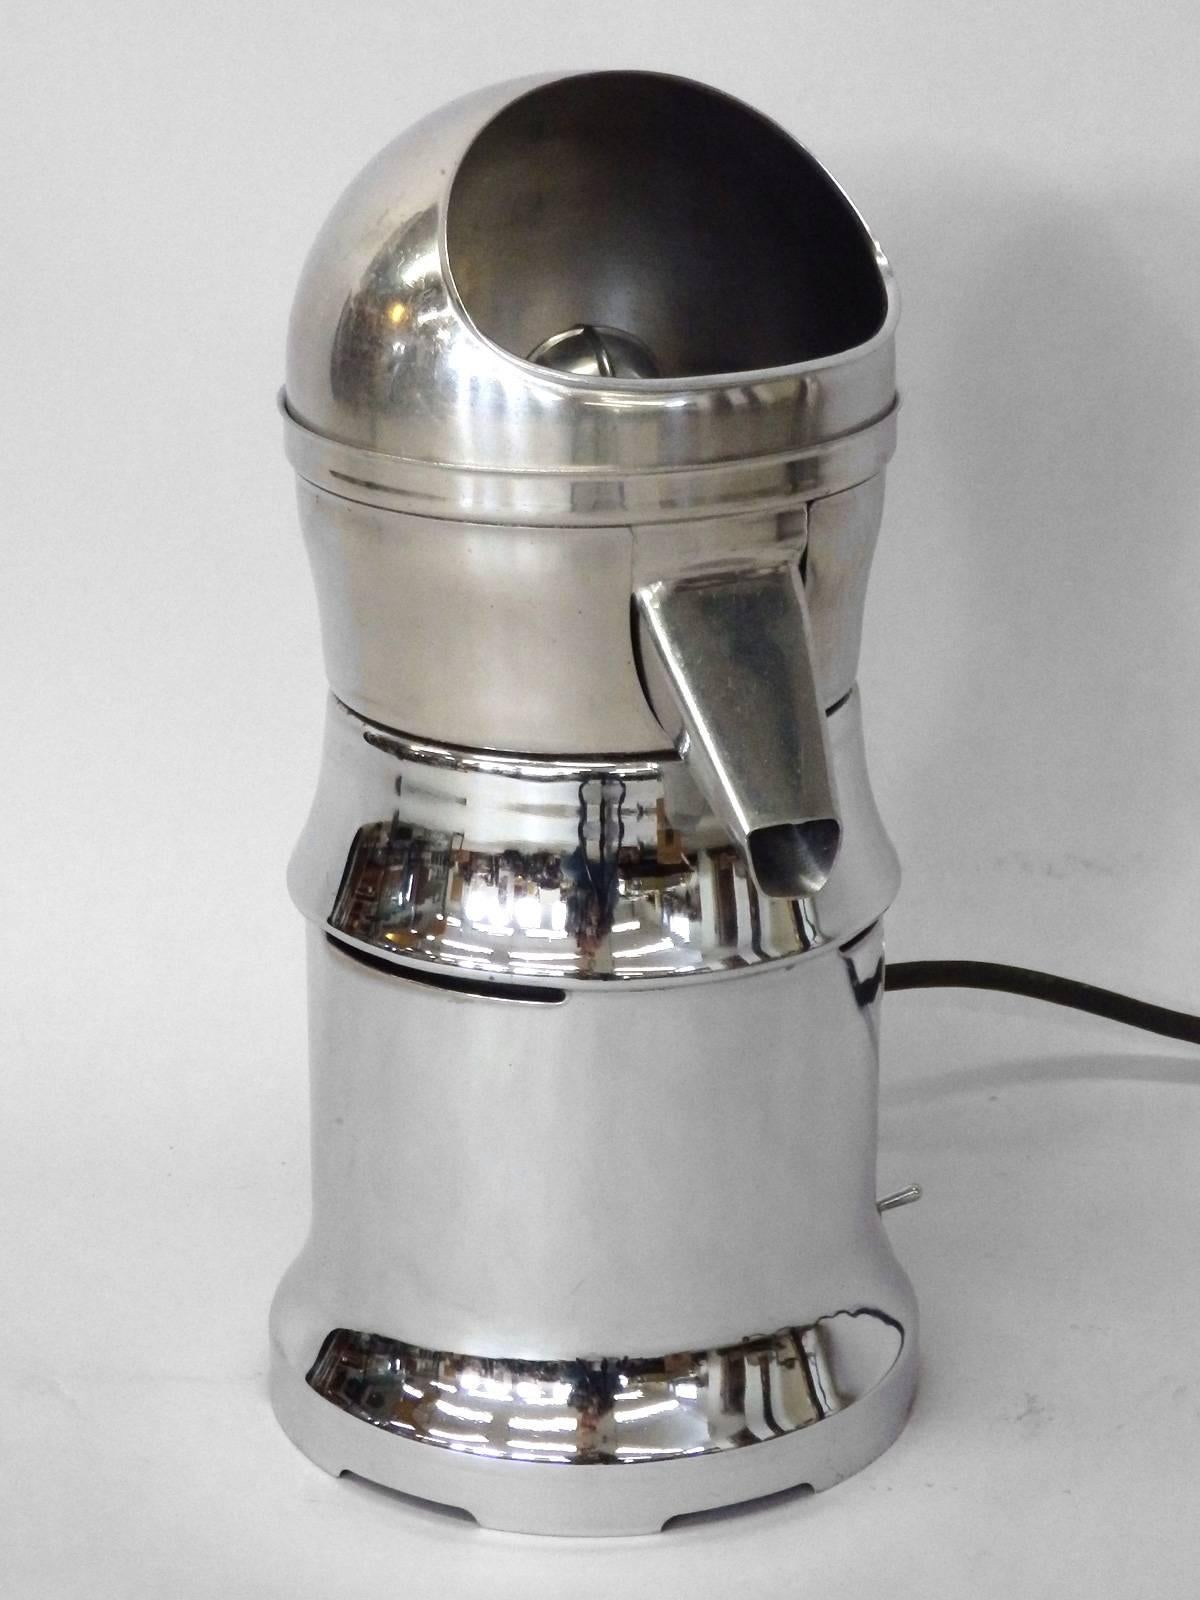 Chrome finish Art Deco countertop Industrial juicer, Sunkist Growers, Los Angeles Ca.
Excellent condition , works properly .